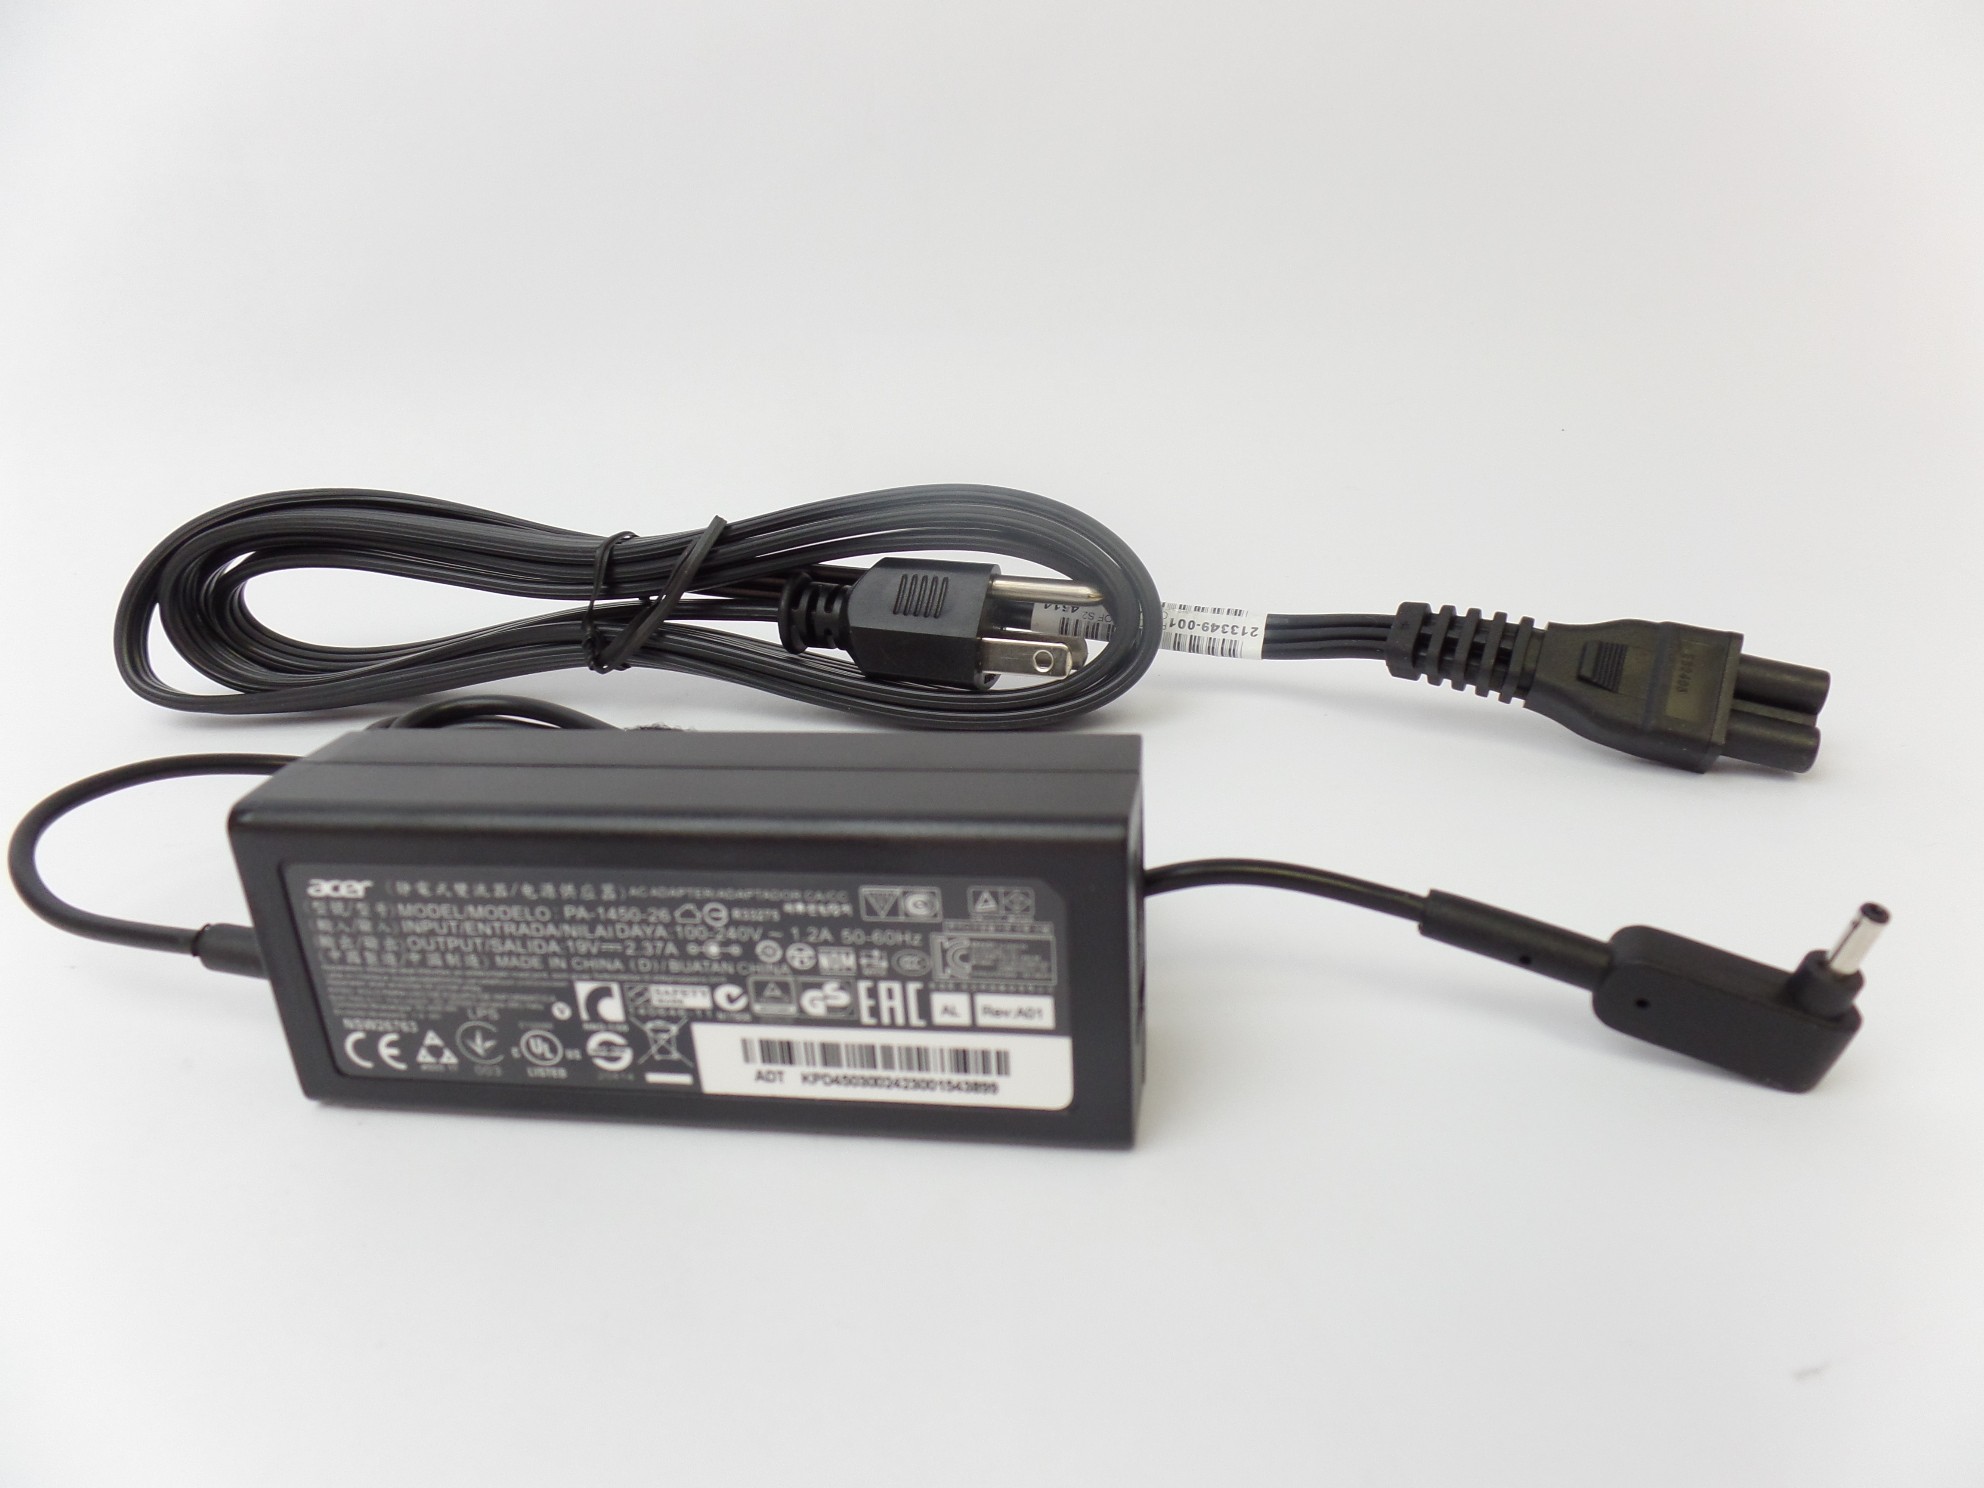 Charger AC Adapter Power Supply for Acer Chromebook 45W C910 CB5-132T CB5-571